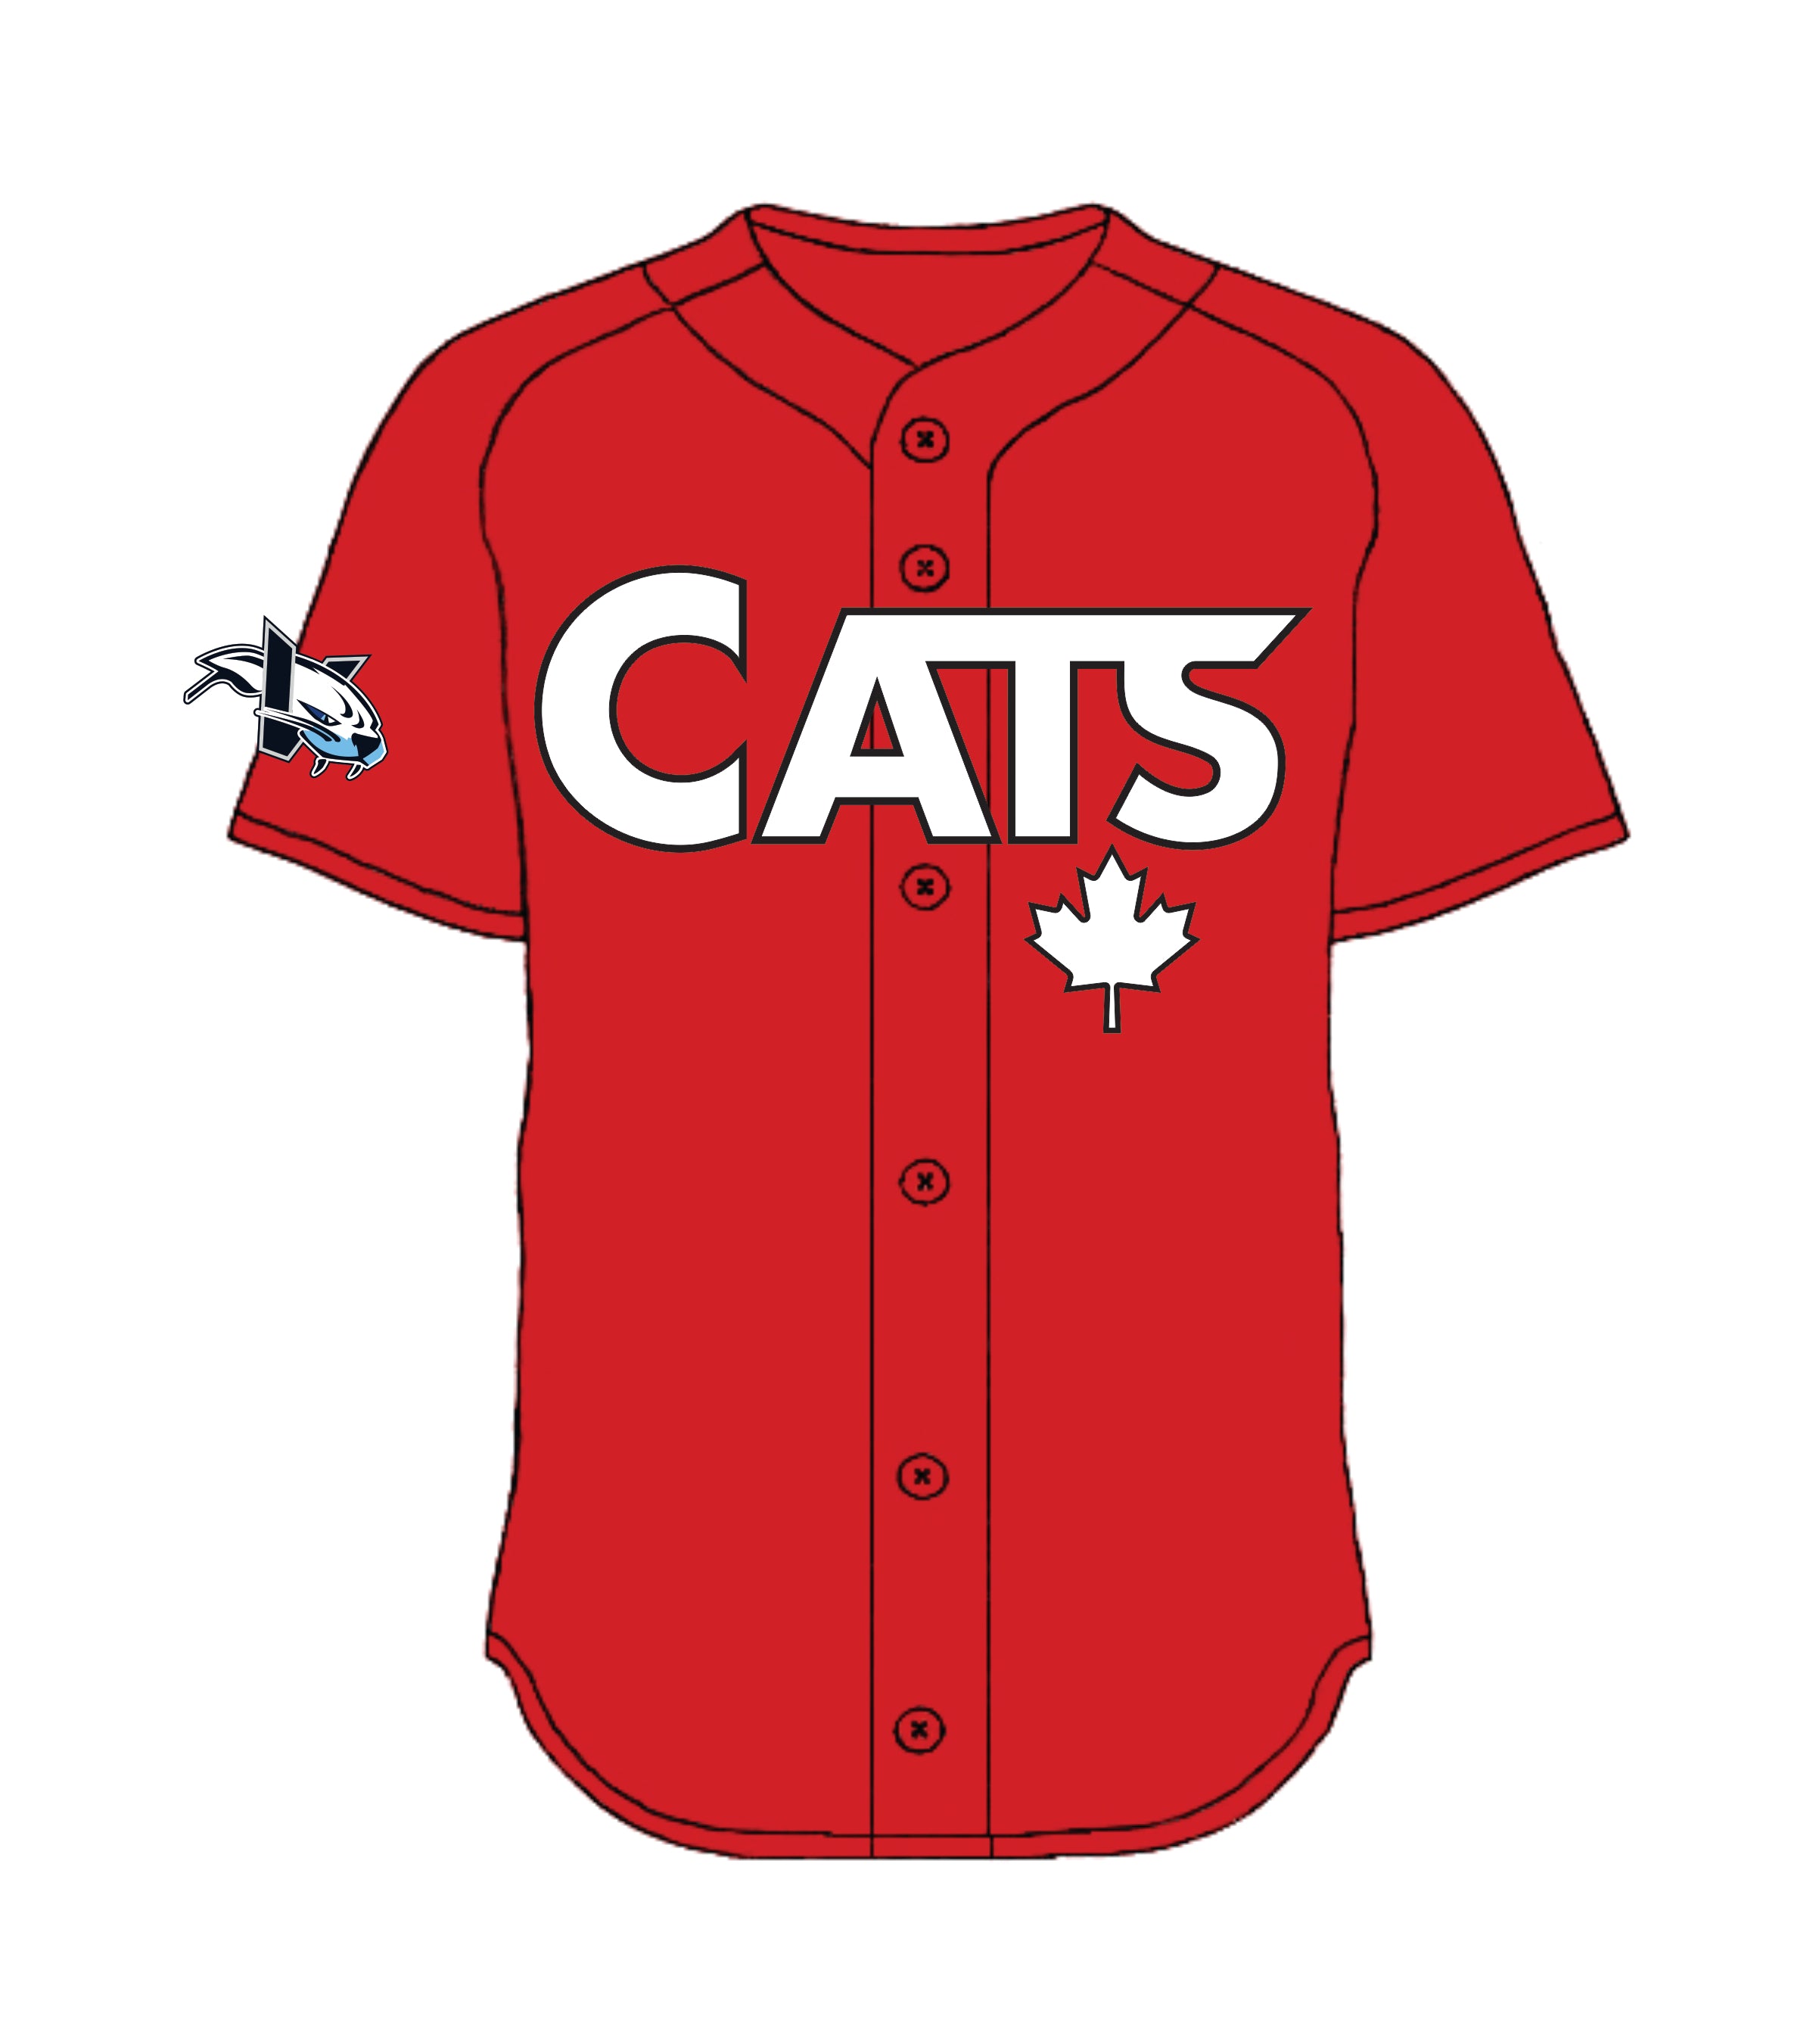 Victoria HarbourCats GAME WORN RED "CATS" JERSEYS